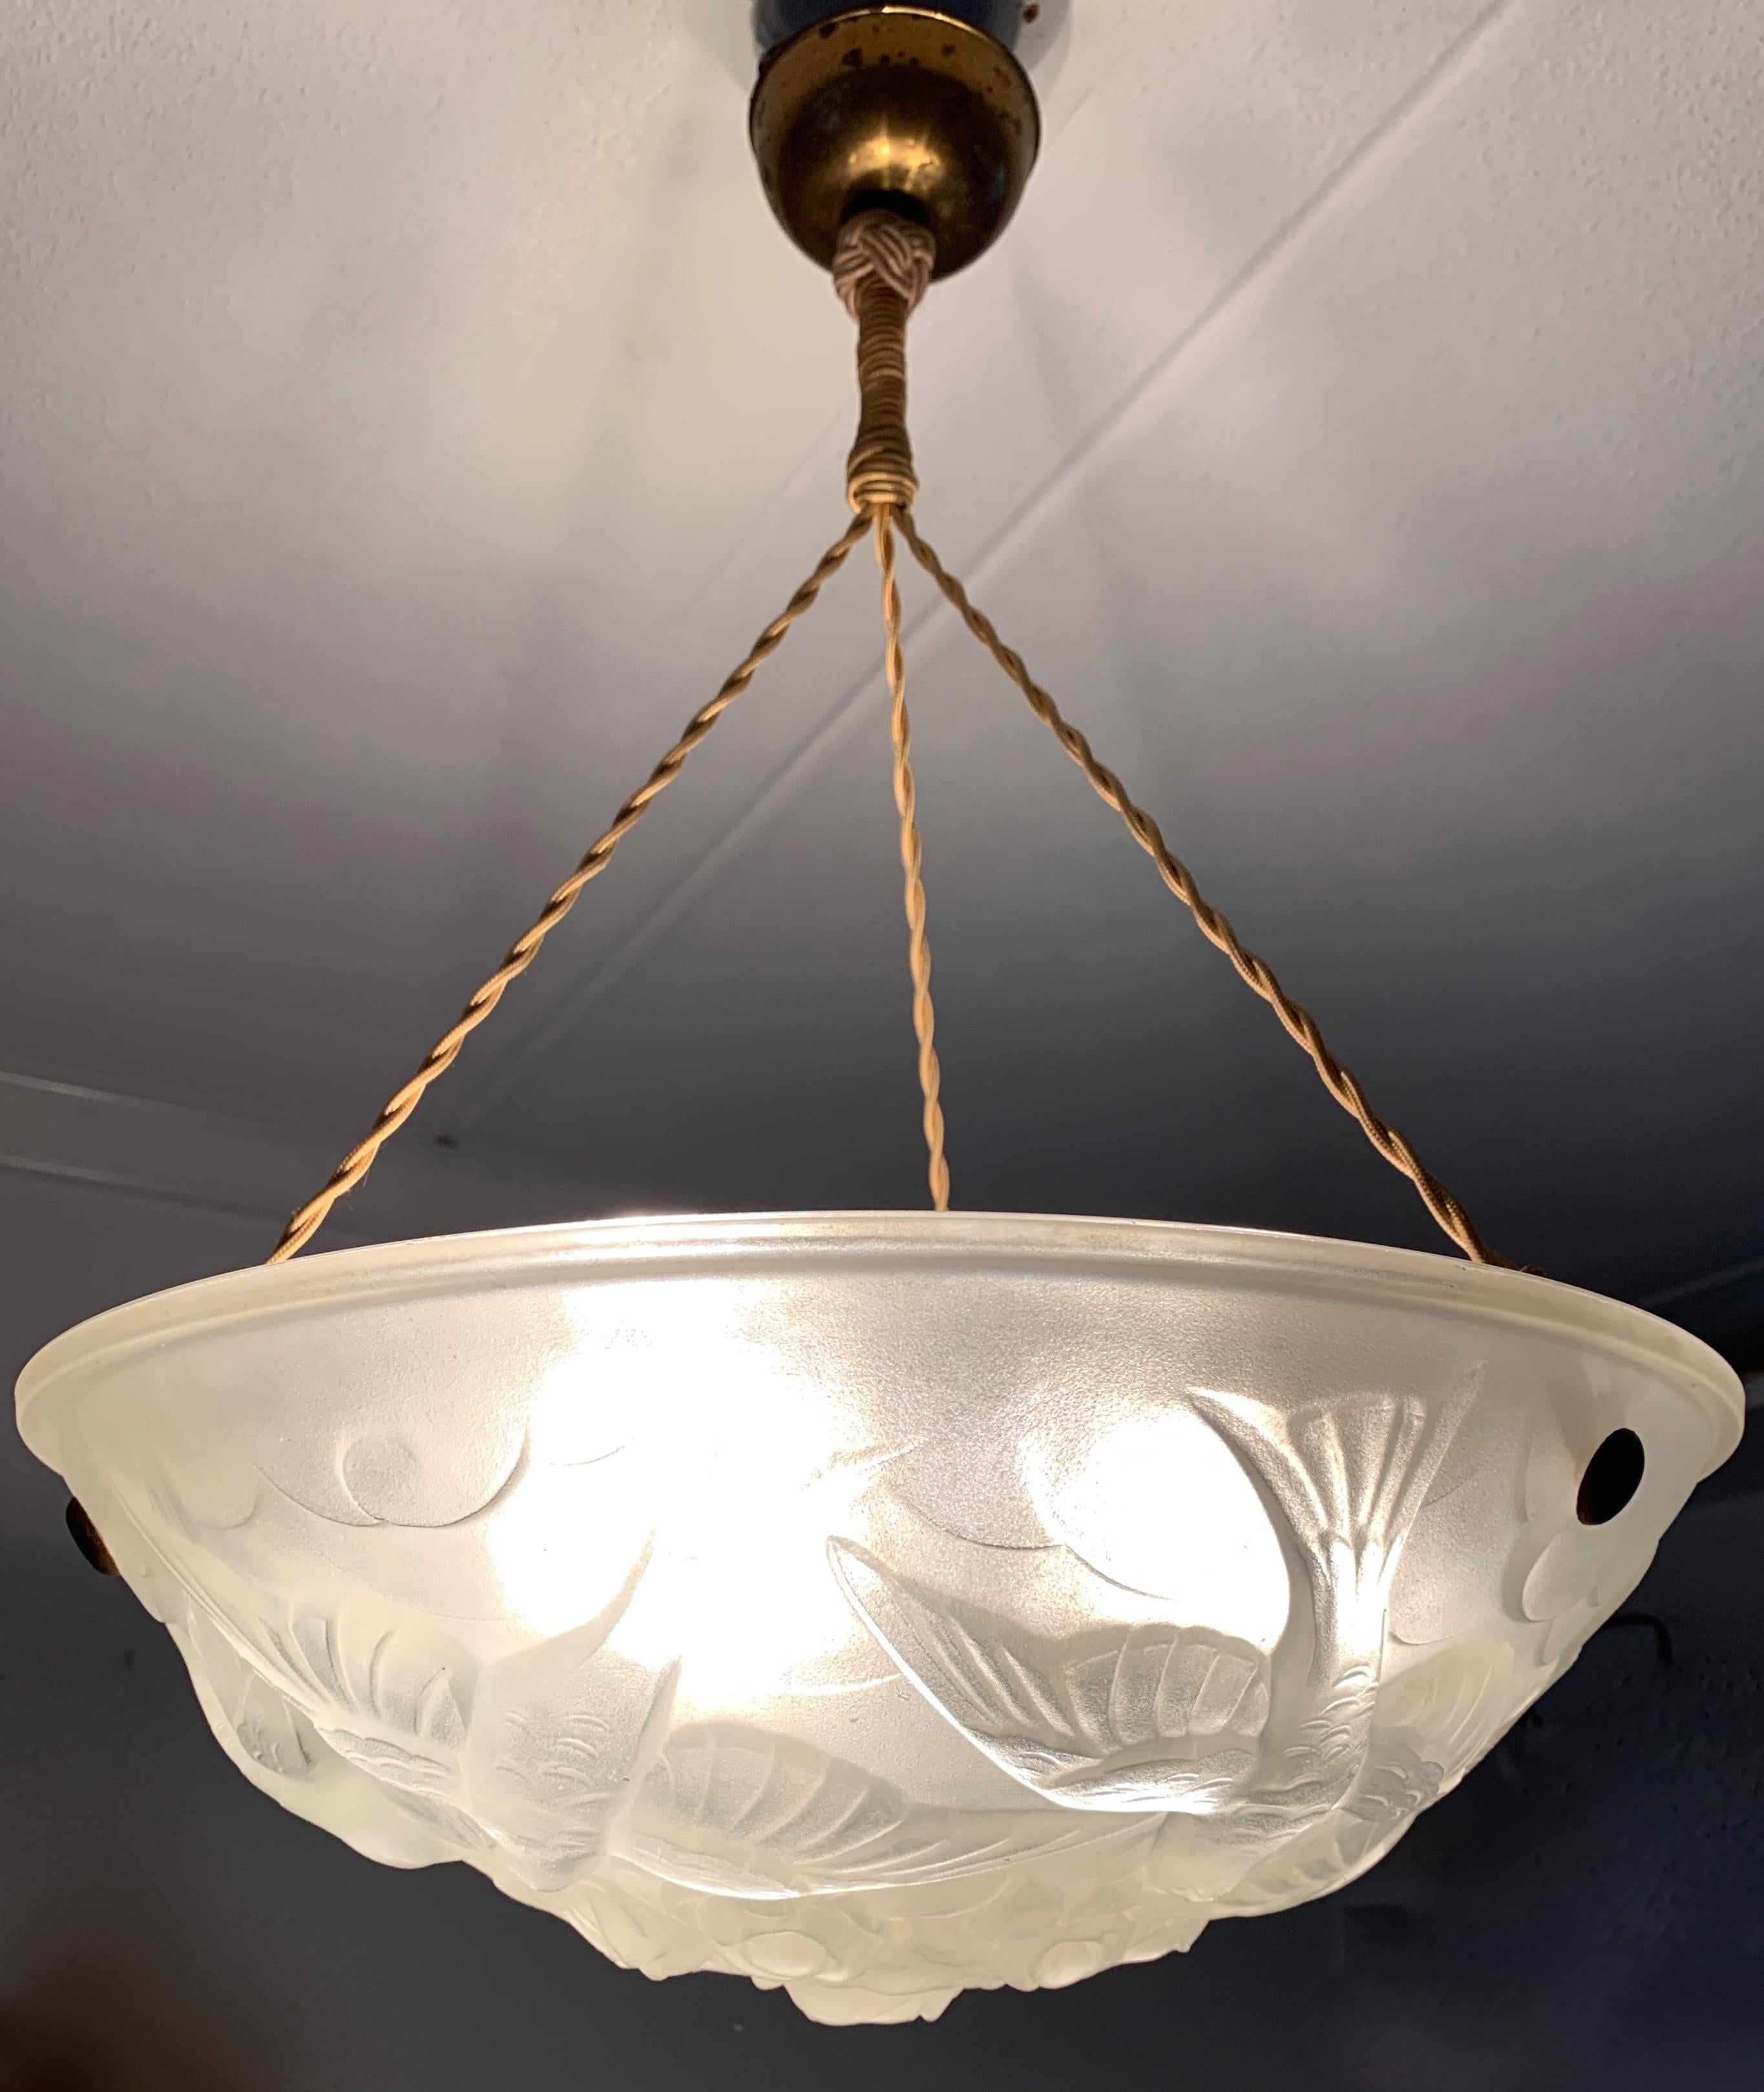 Hand-Crafted Stylish & Meaningful Art Deco Chandelier, Frosted Glass w. Flying Pigeons Sabine